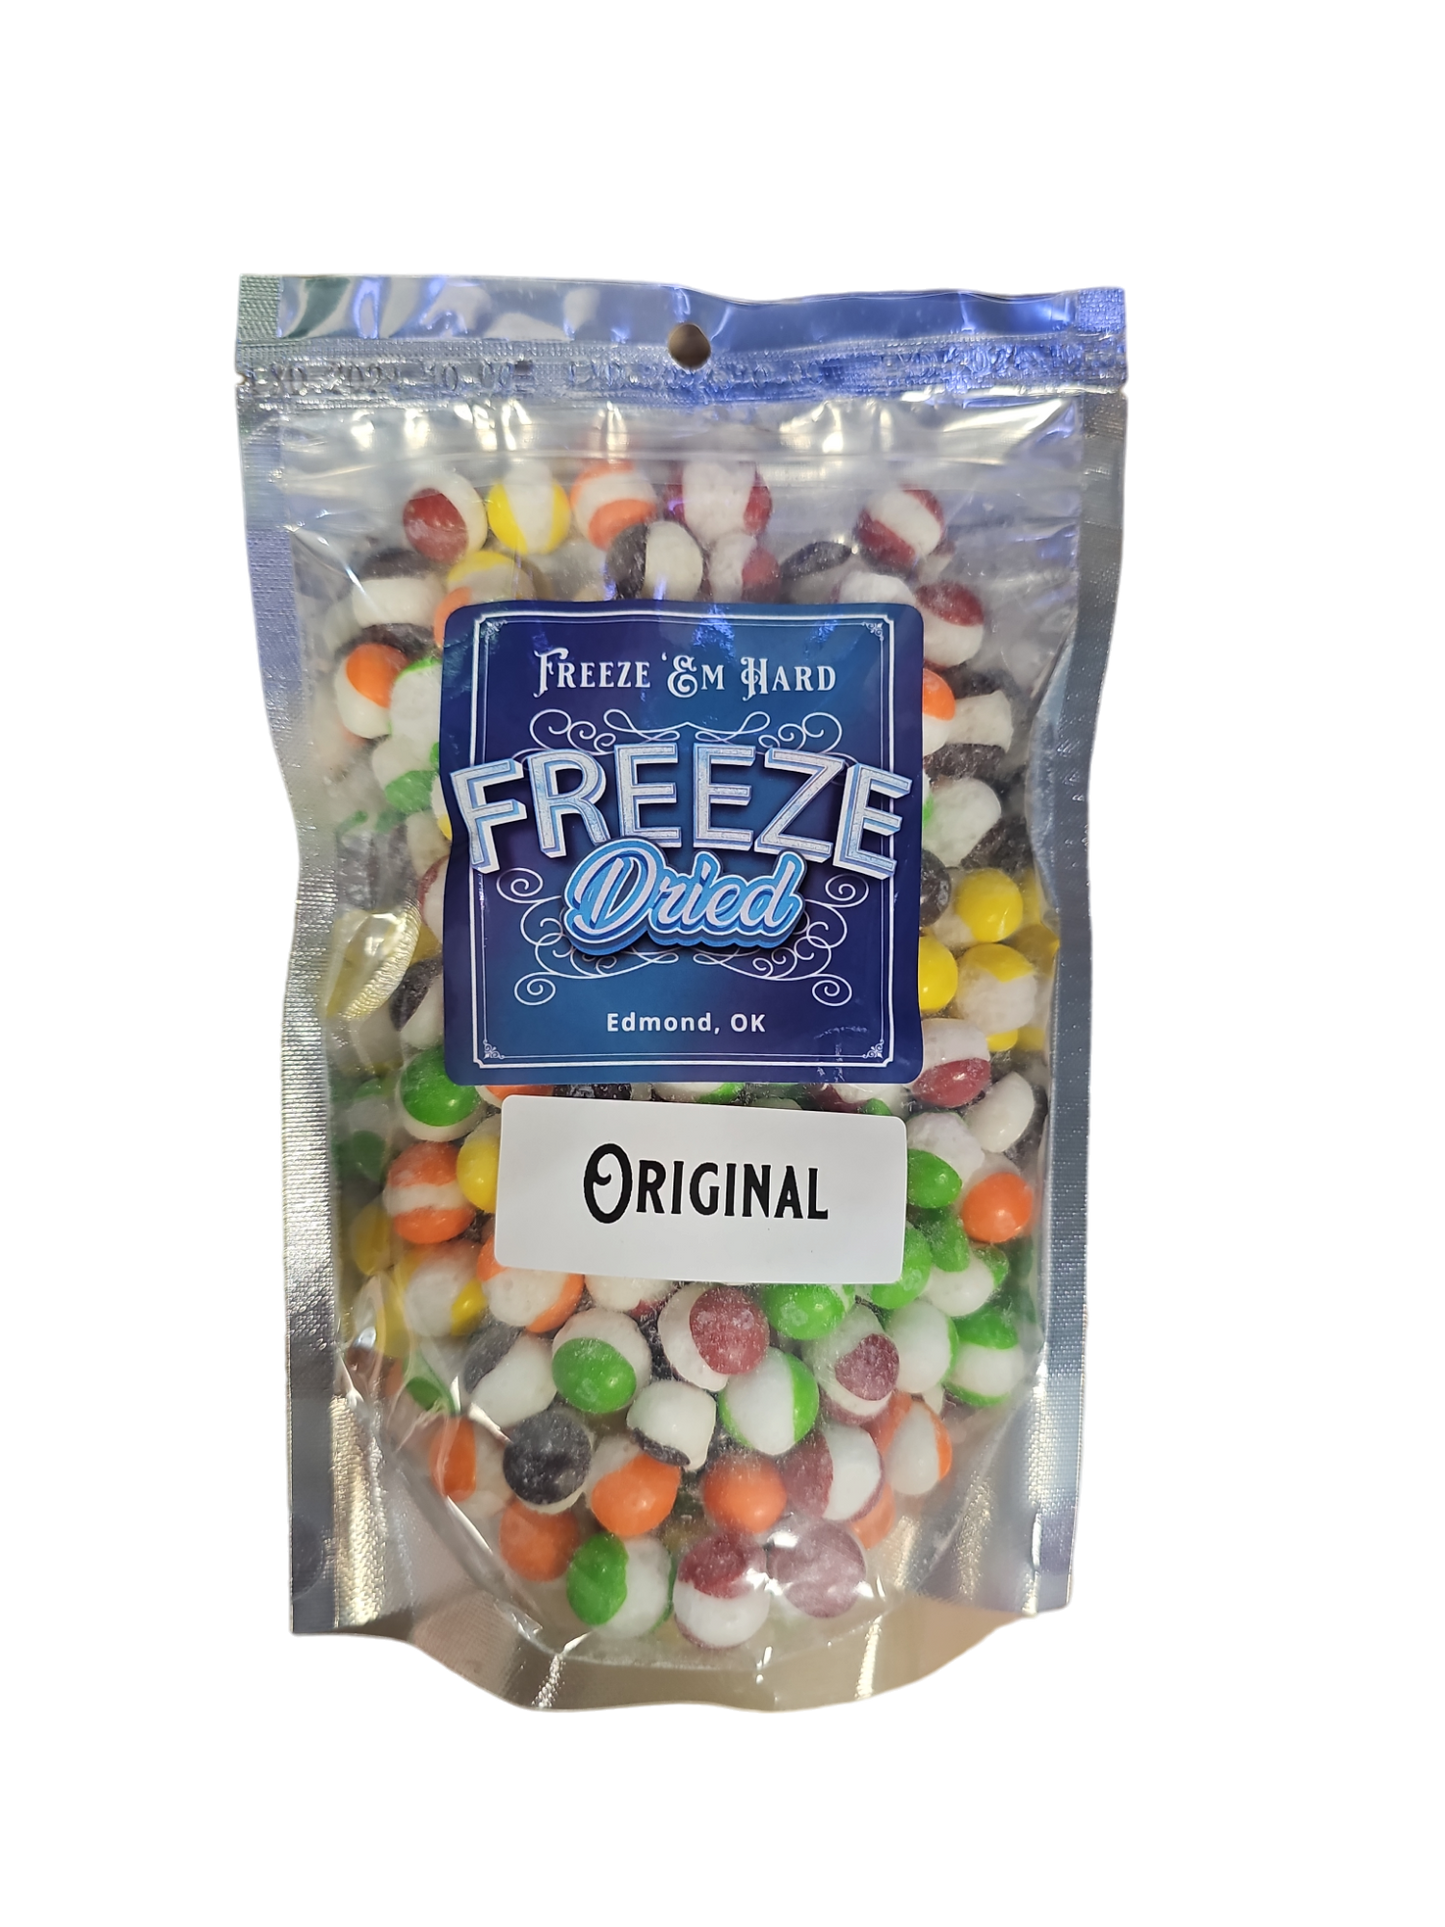 8oz MOTHERLOAD SIZE - Freeze Dried ORIGINAL Candy Fruit Flavored Crunch